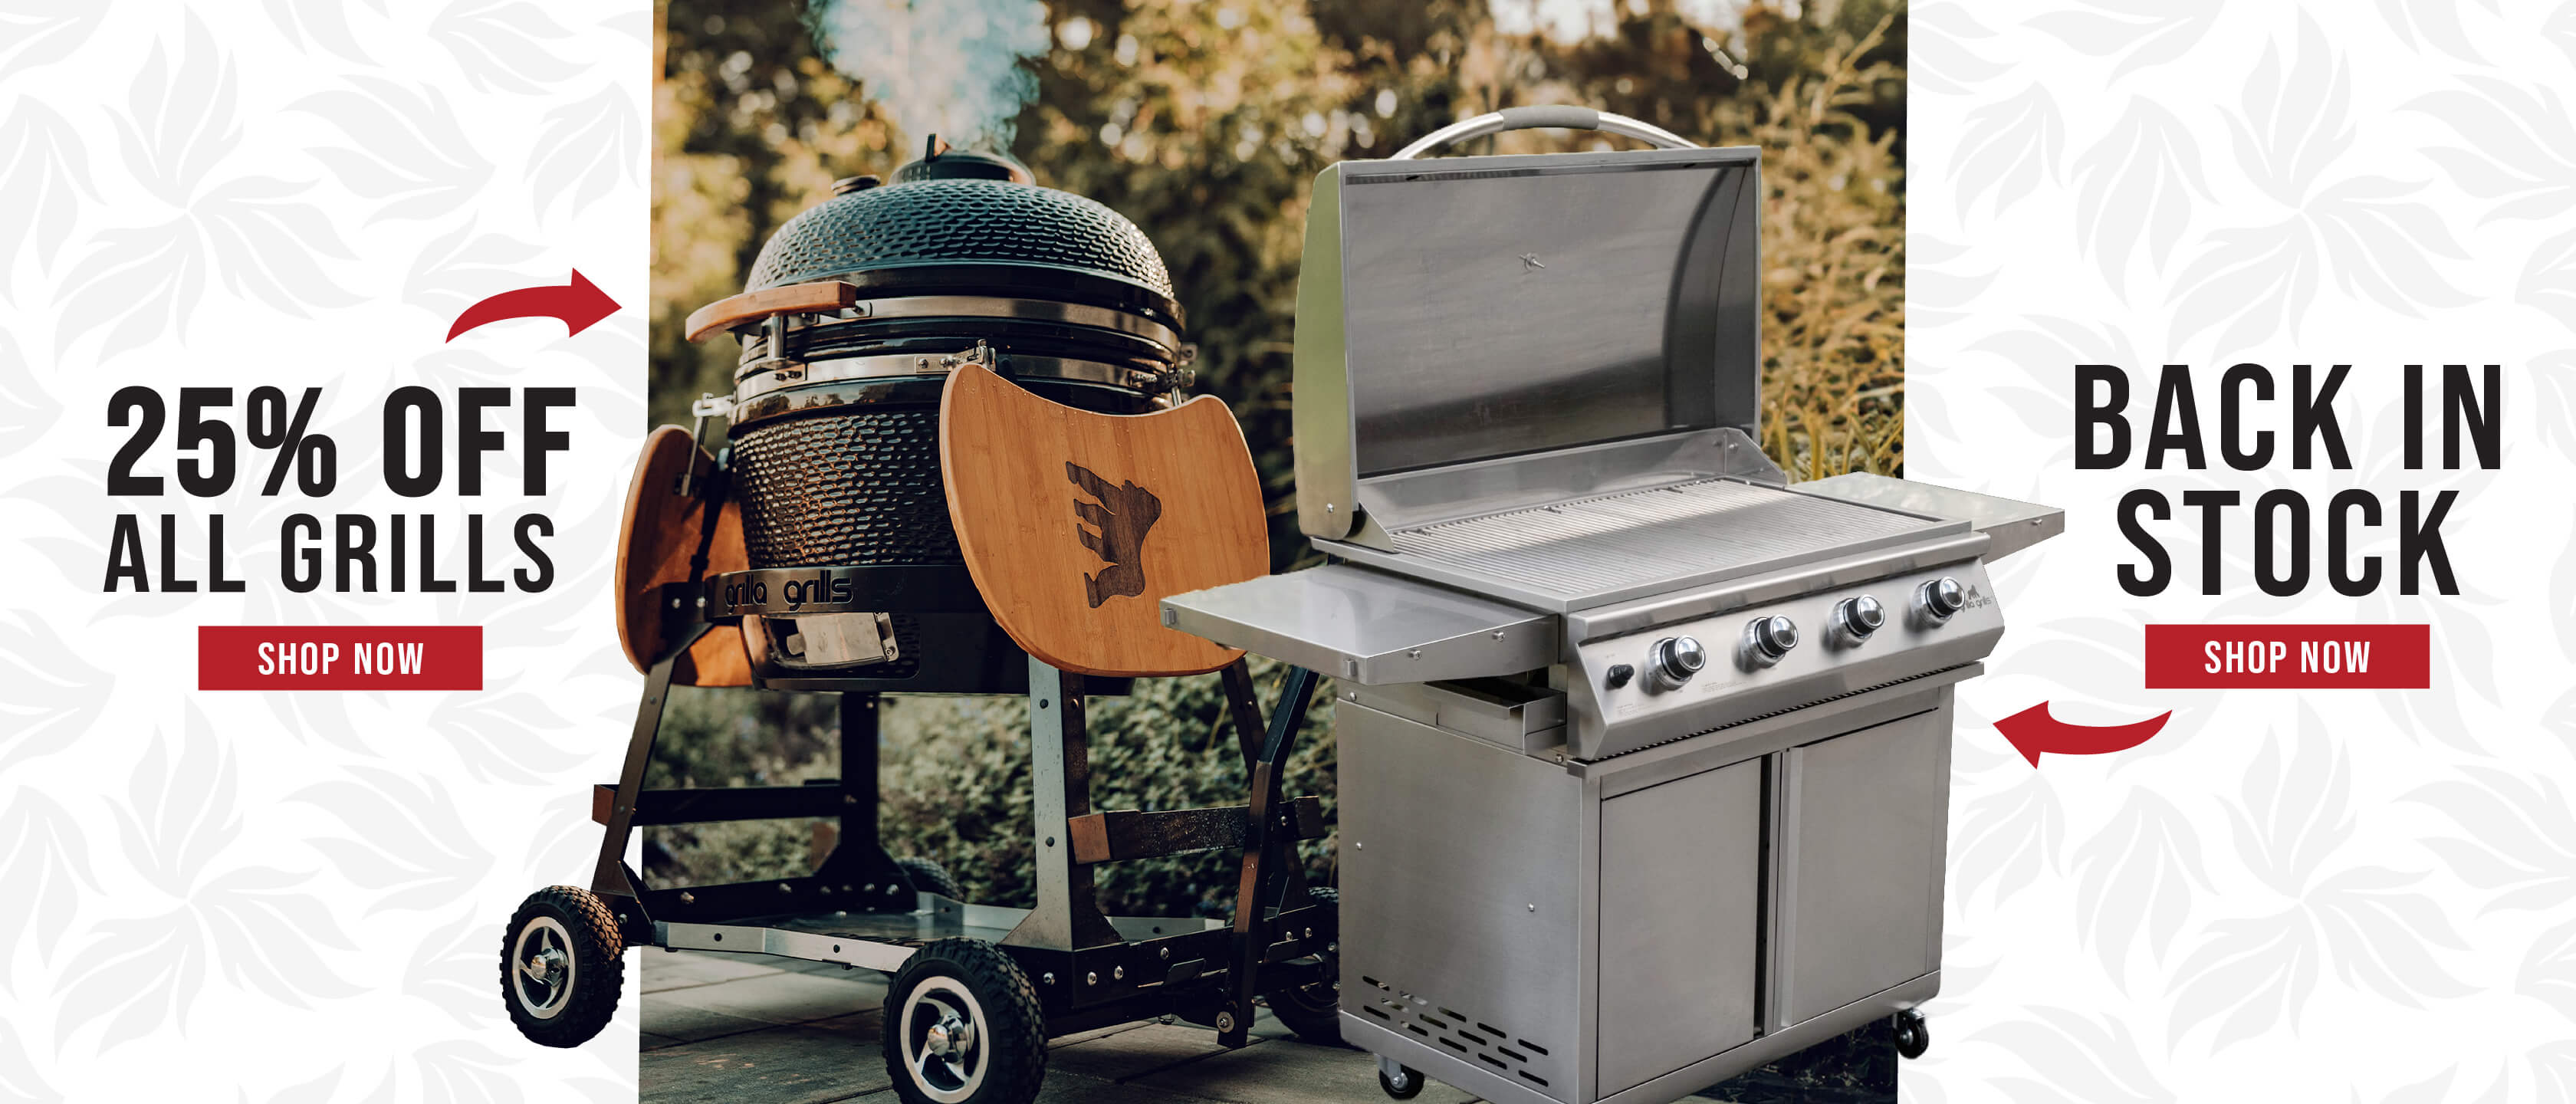 Our Biggest Sale Yet! 25% off all grills + Primate back in stock